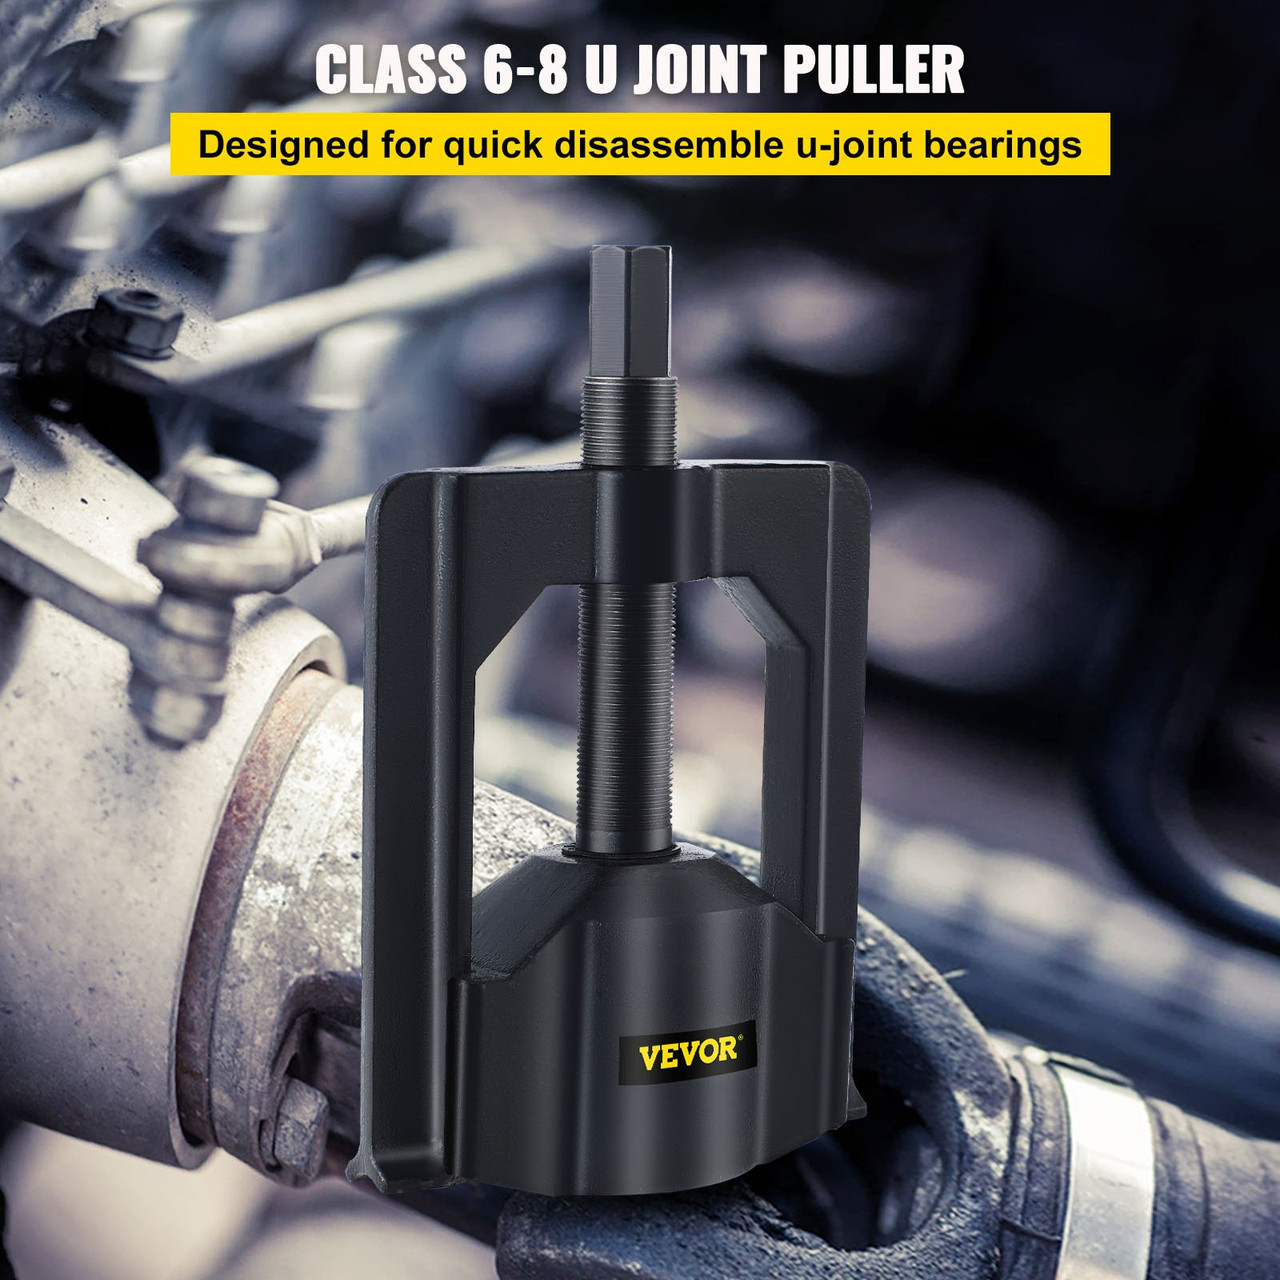 U Joint Puller (Class 6-8) Heavy Duty Universal Joint Puller U Joint Removal Tool w/ 5192 Bearing Cup Installer